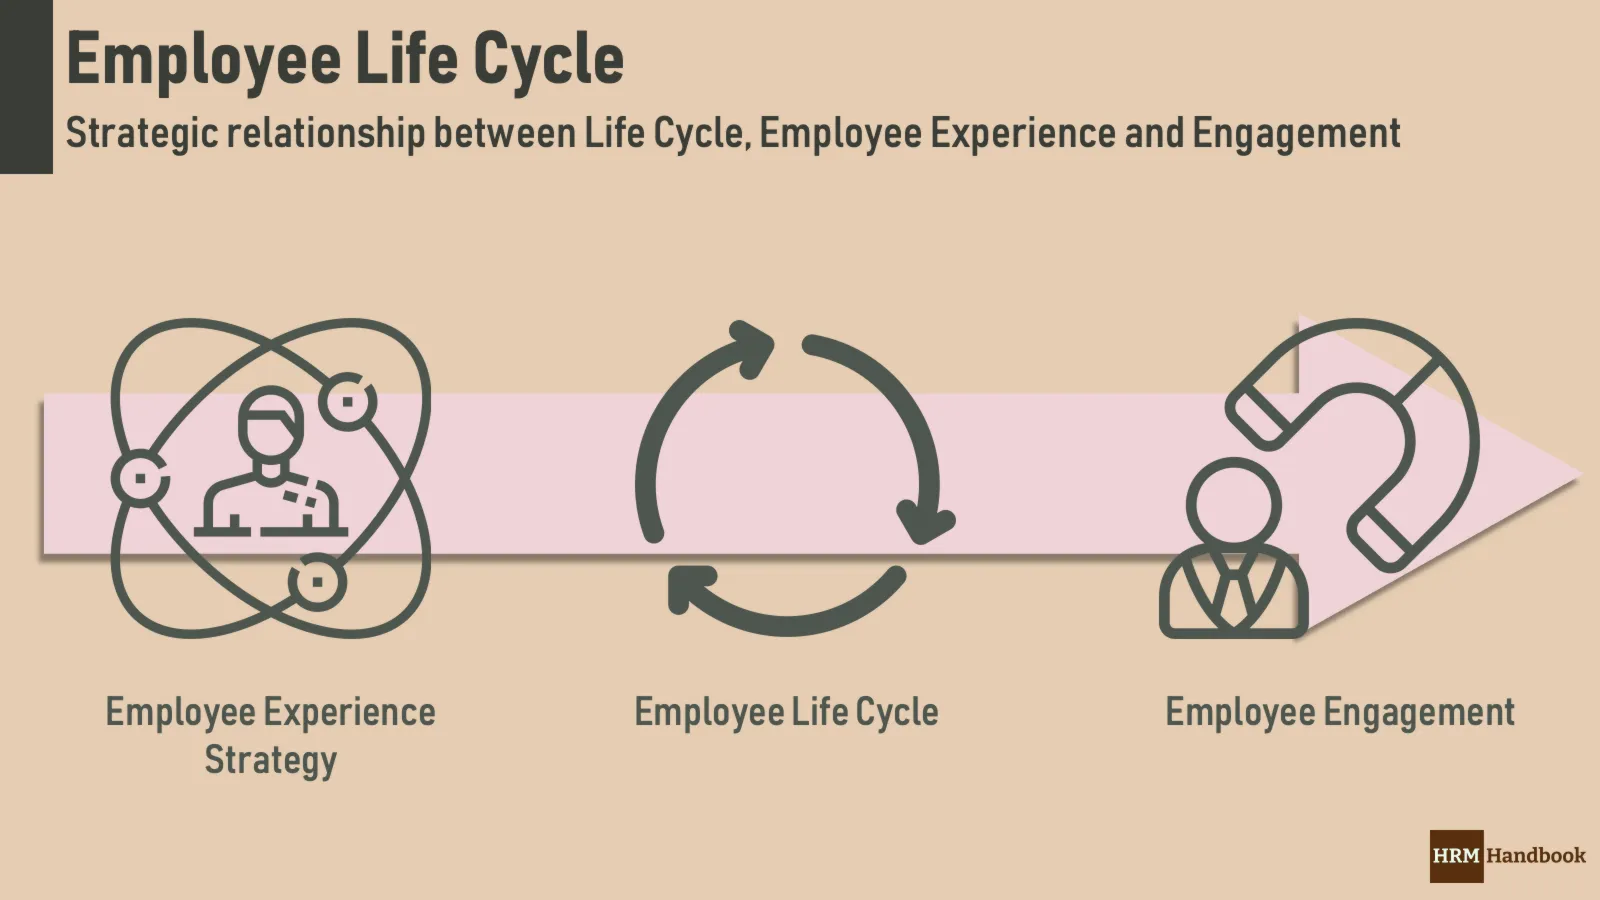 The relationship between Employee Experience, Employee Life Cycle and Employee Engagement